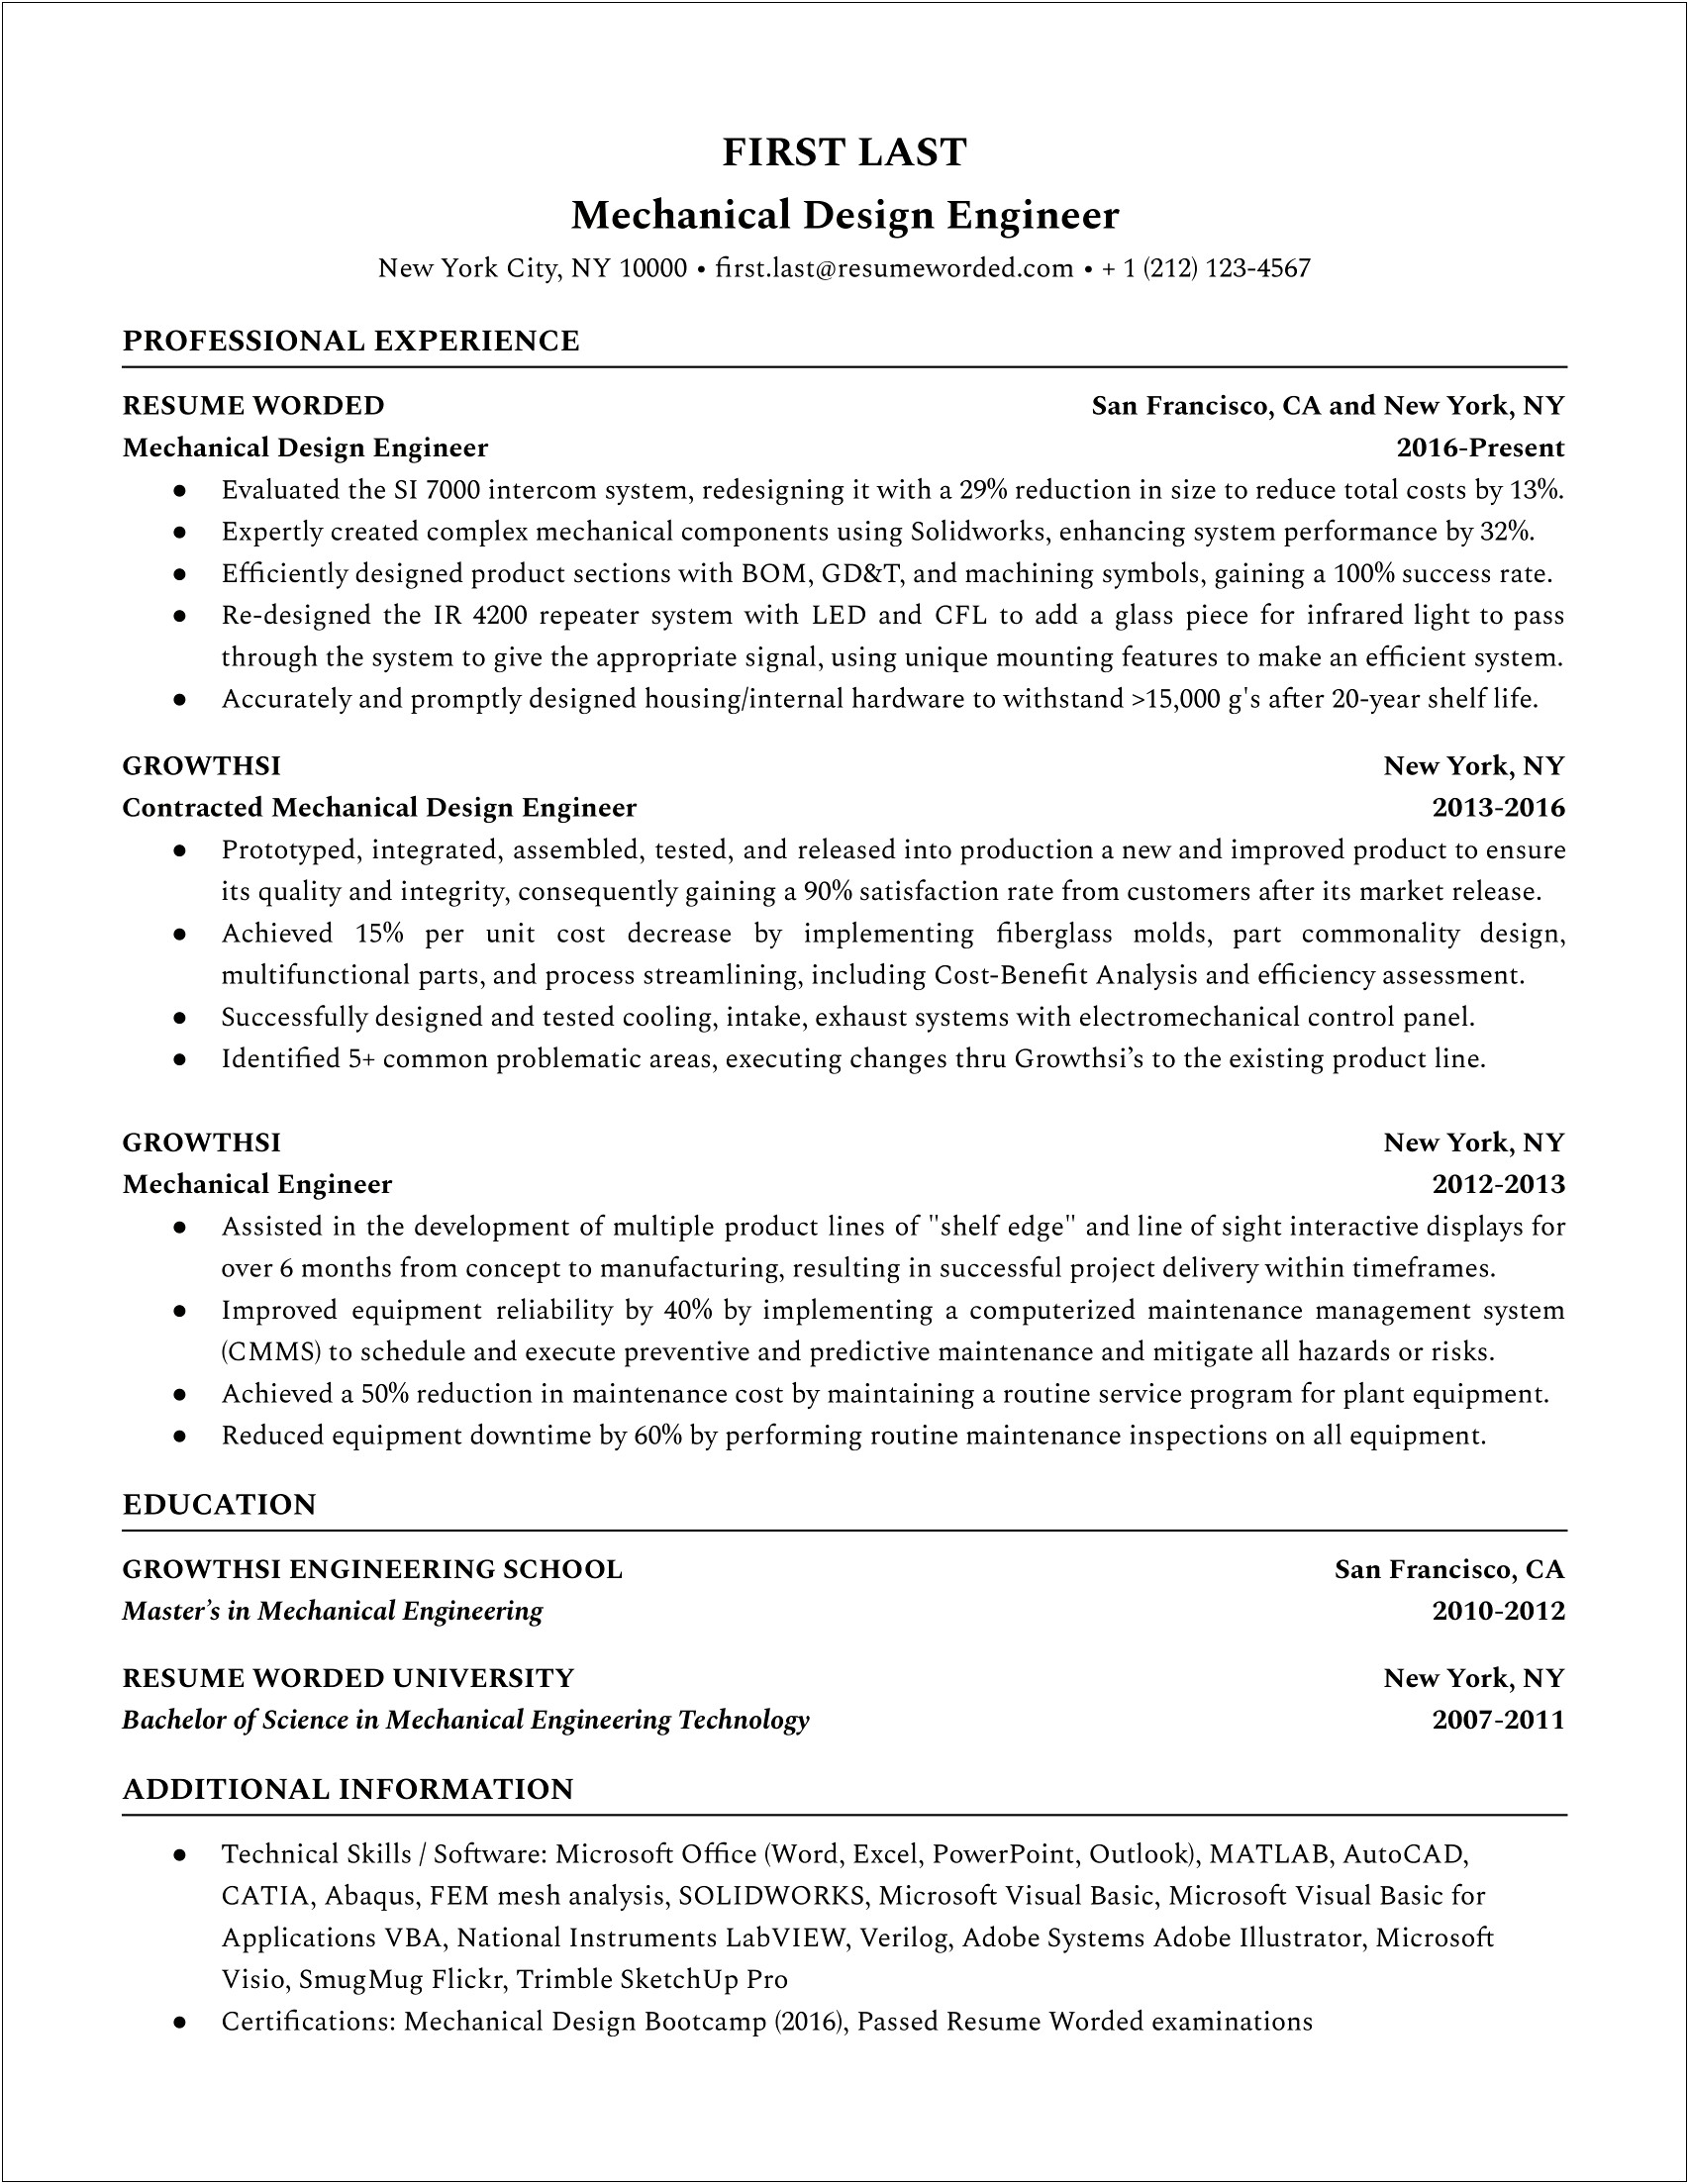 Mechanical Engineer With Some Experience Resume